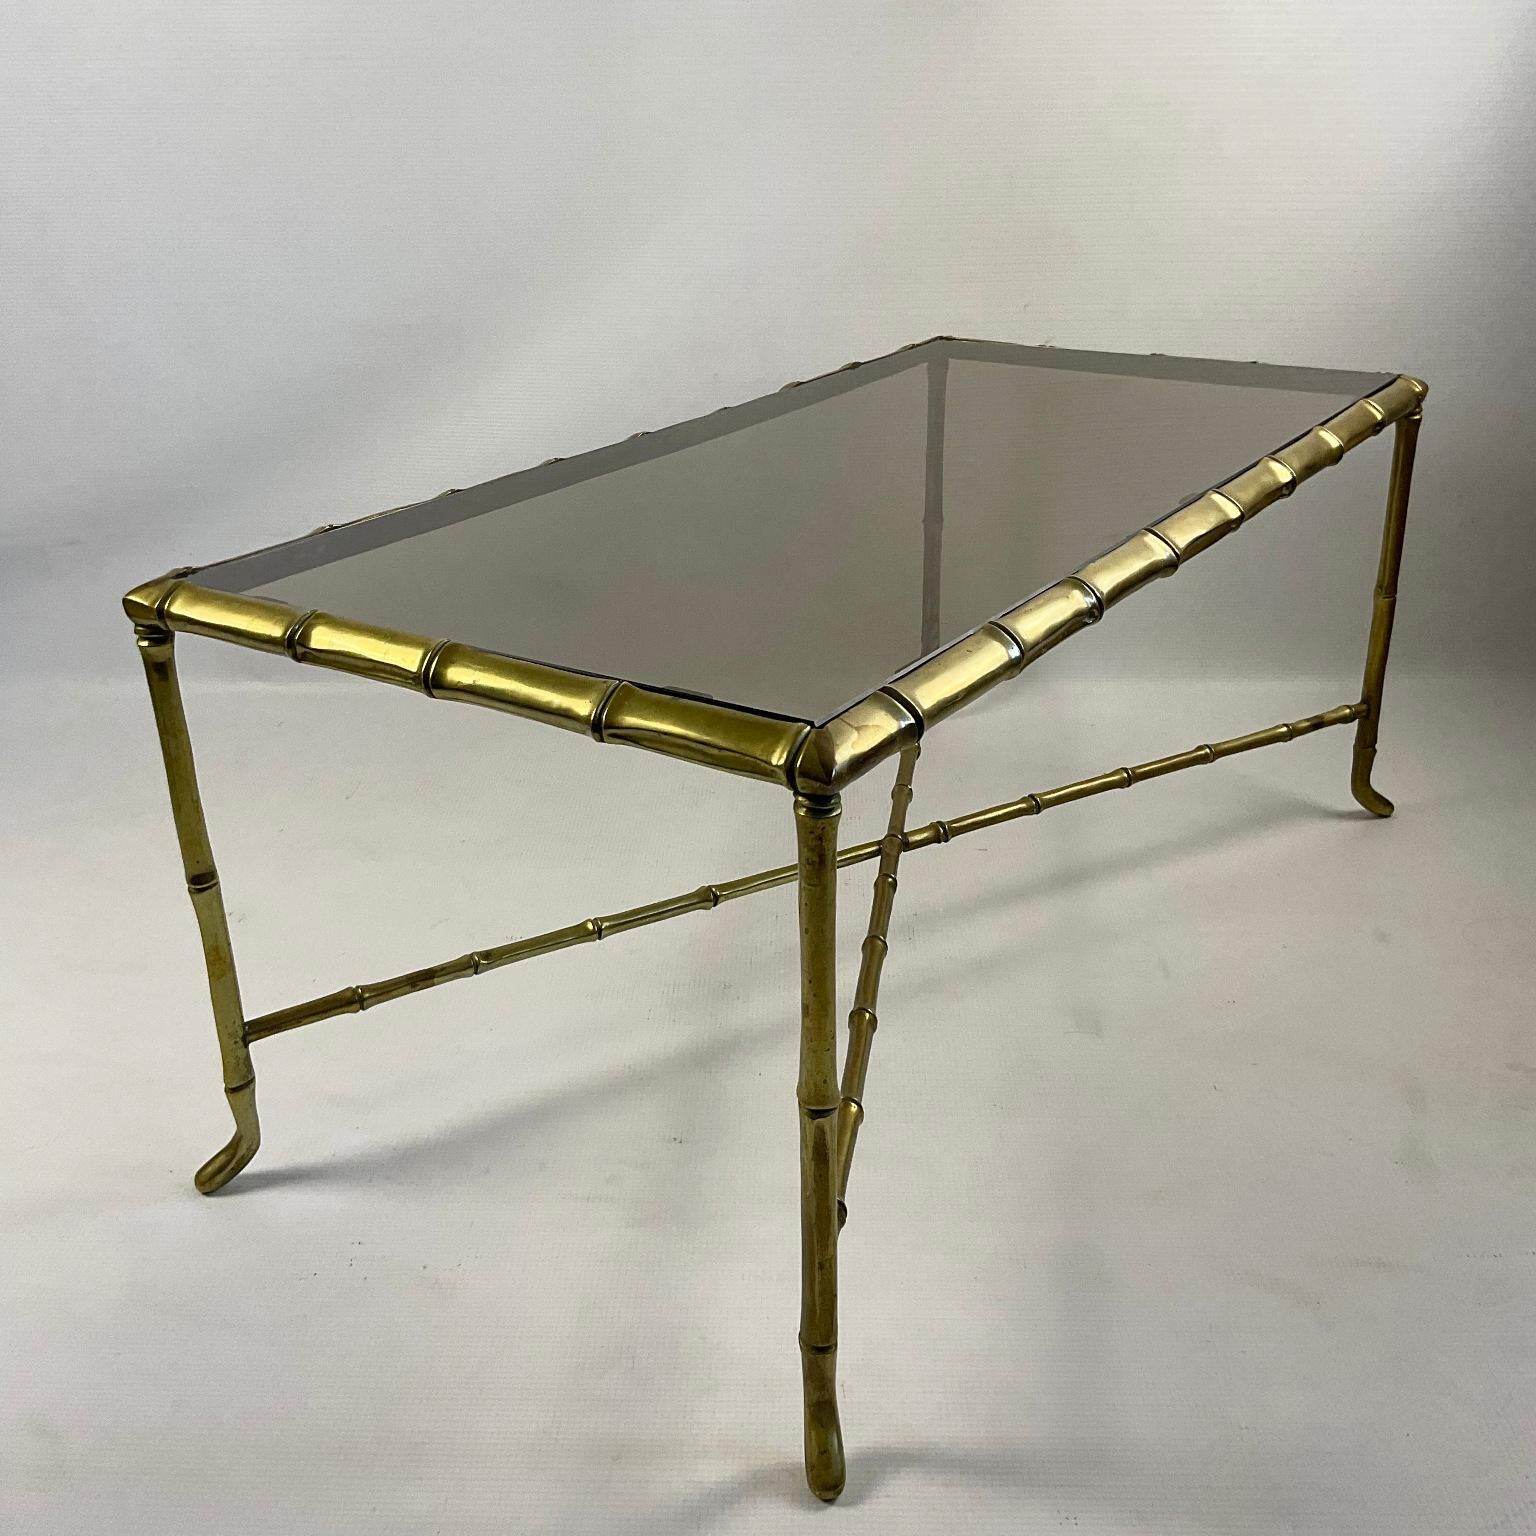 French Faux Bamboo Bronze Coffee Table Attributed to Maison Baguès France 1940s For Sale